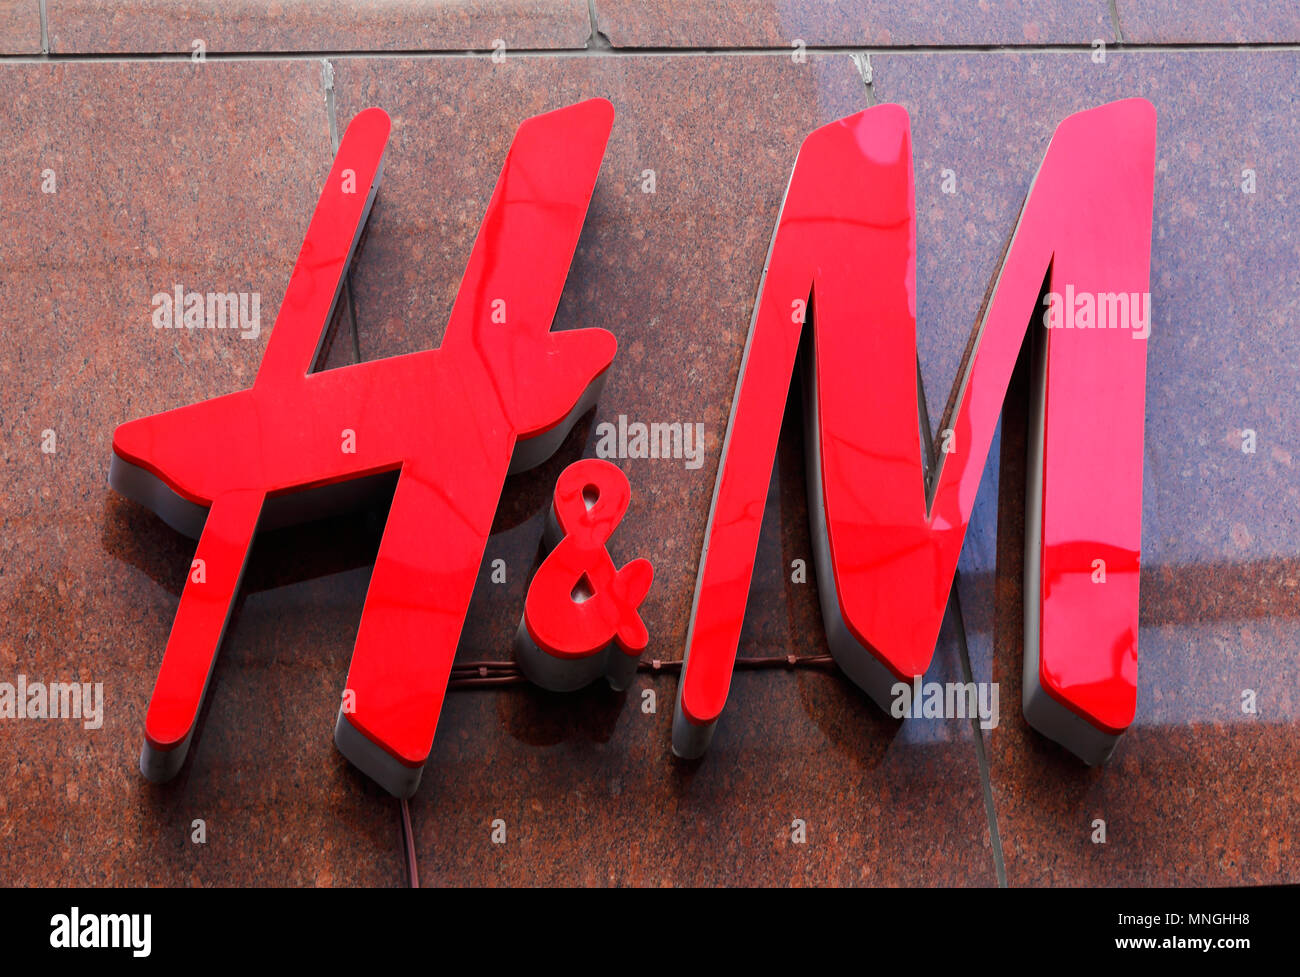 H&m Logo Shop High Resolution Stock Photography and Images - Alamy